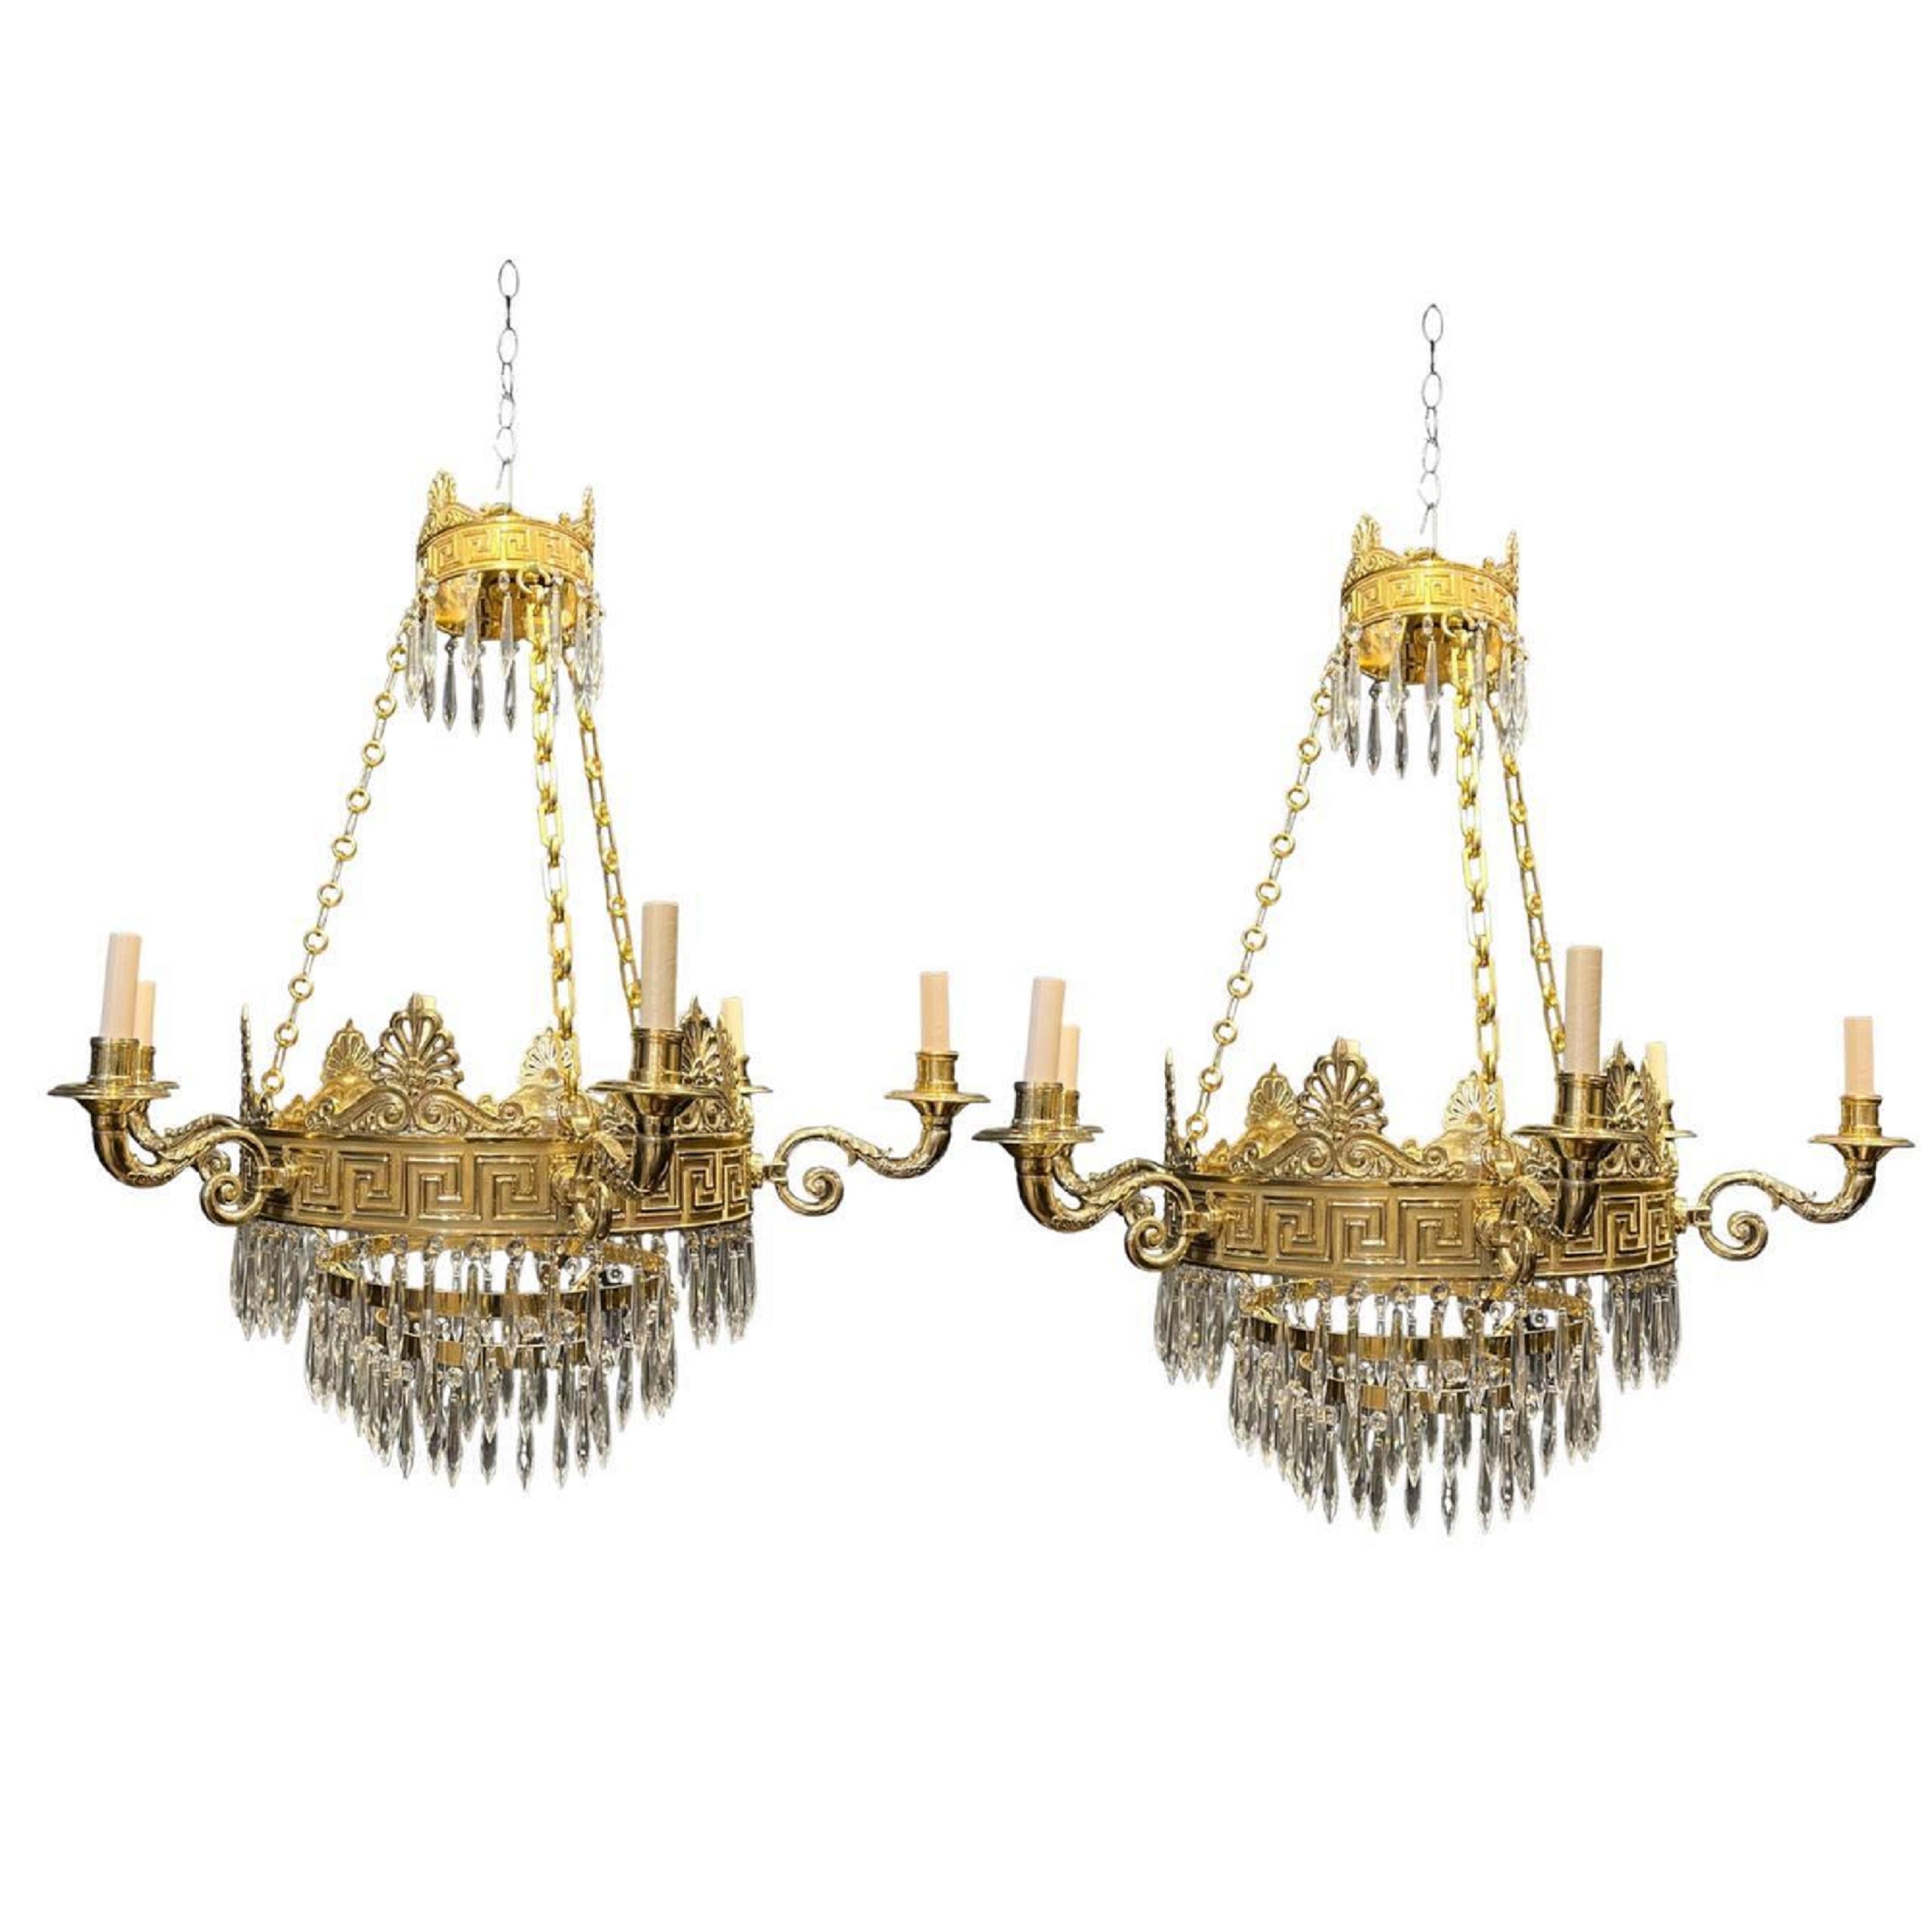 A late 19th Century Caldwell neoclassical style bronze chandelier with Greek key design and crystals hangings 